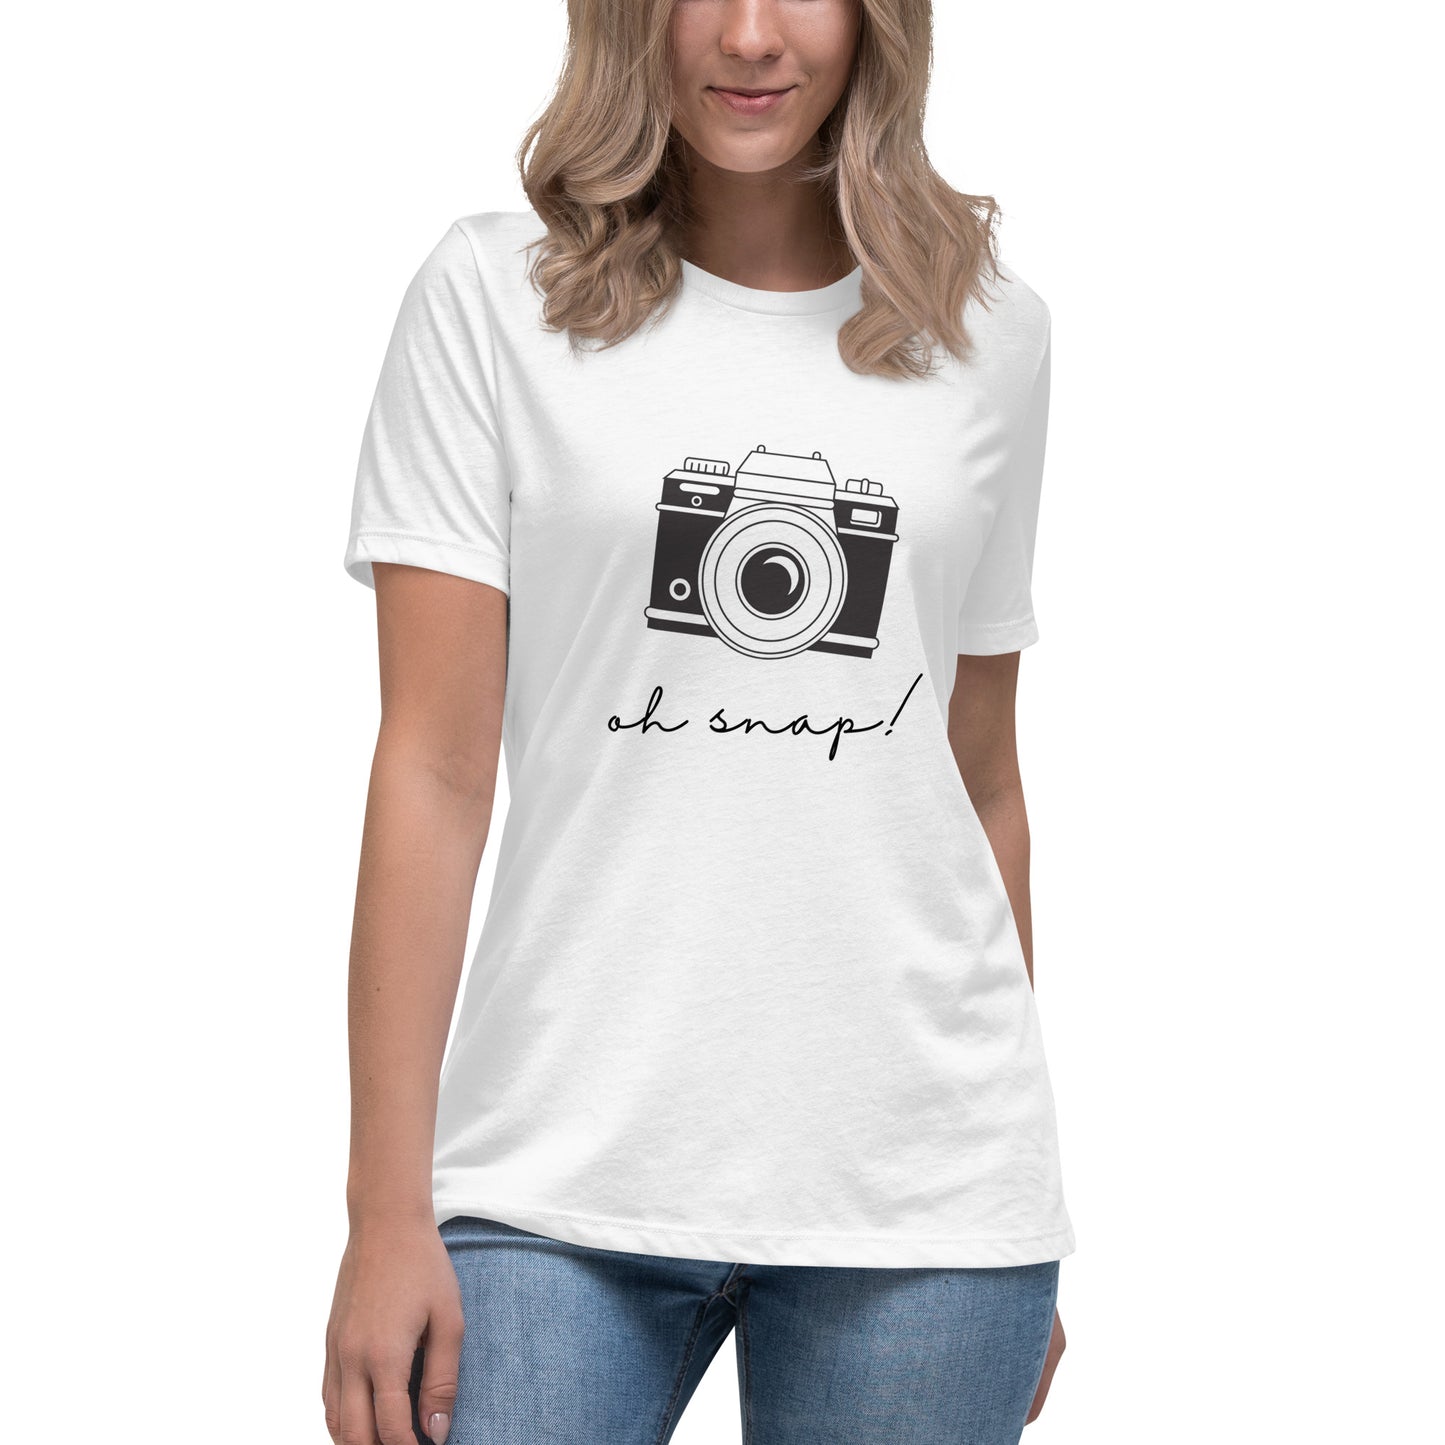 Oh Snap (black print) Women's Relaxed T-Shirt